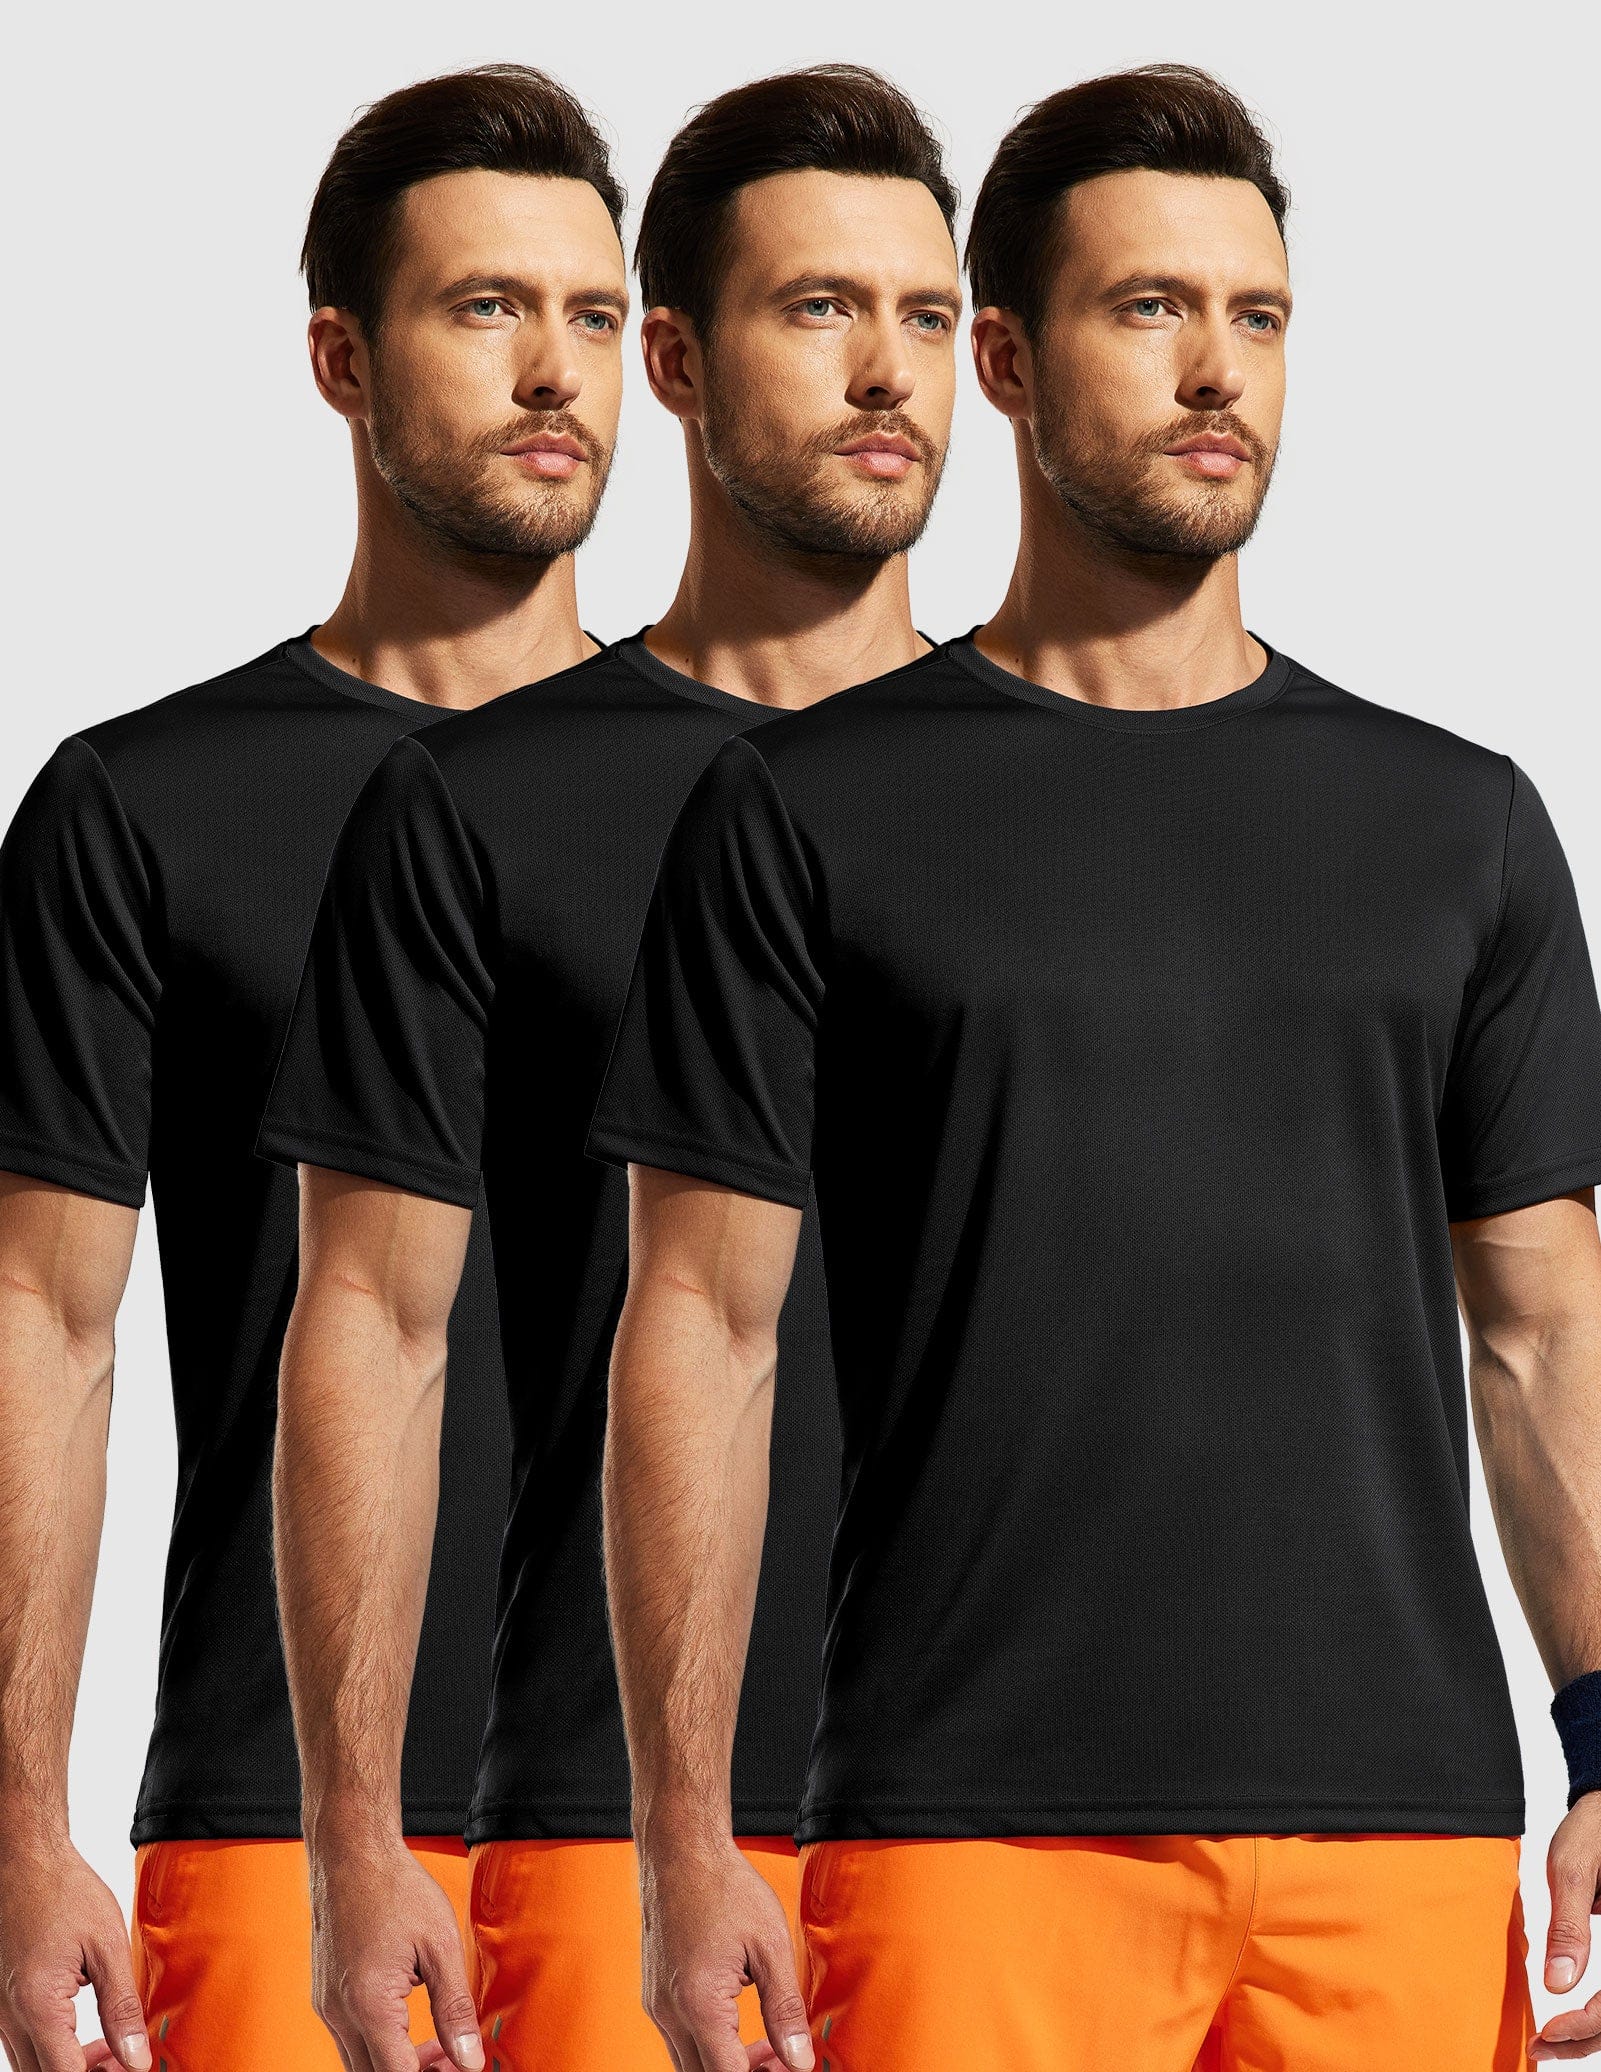 Men's Dry Fit Workout T-shirts for Gym Athletic Running Men Shirts MIER